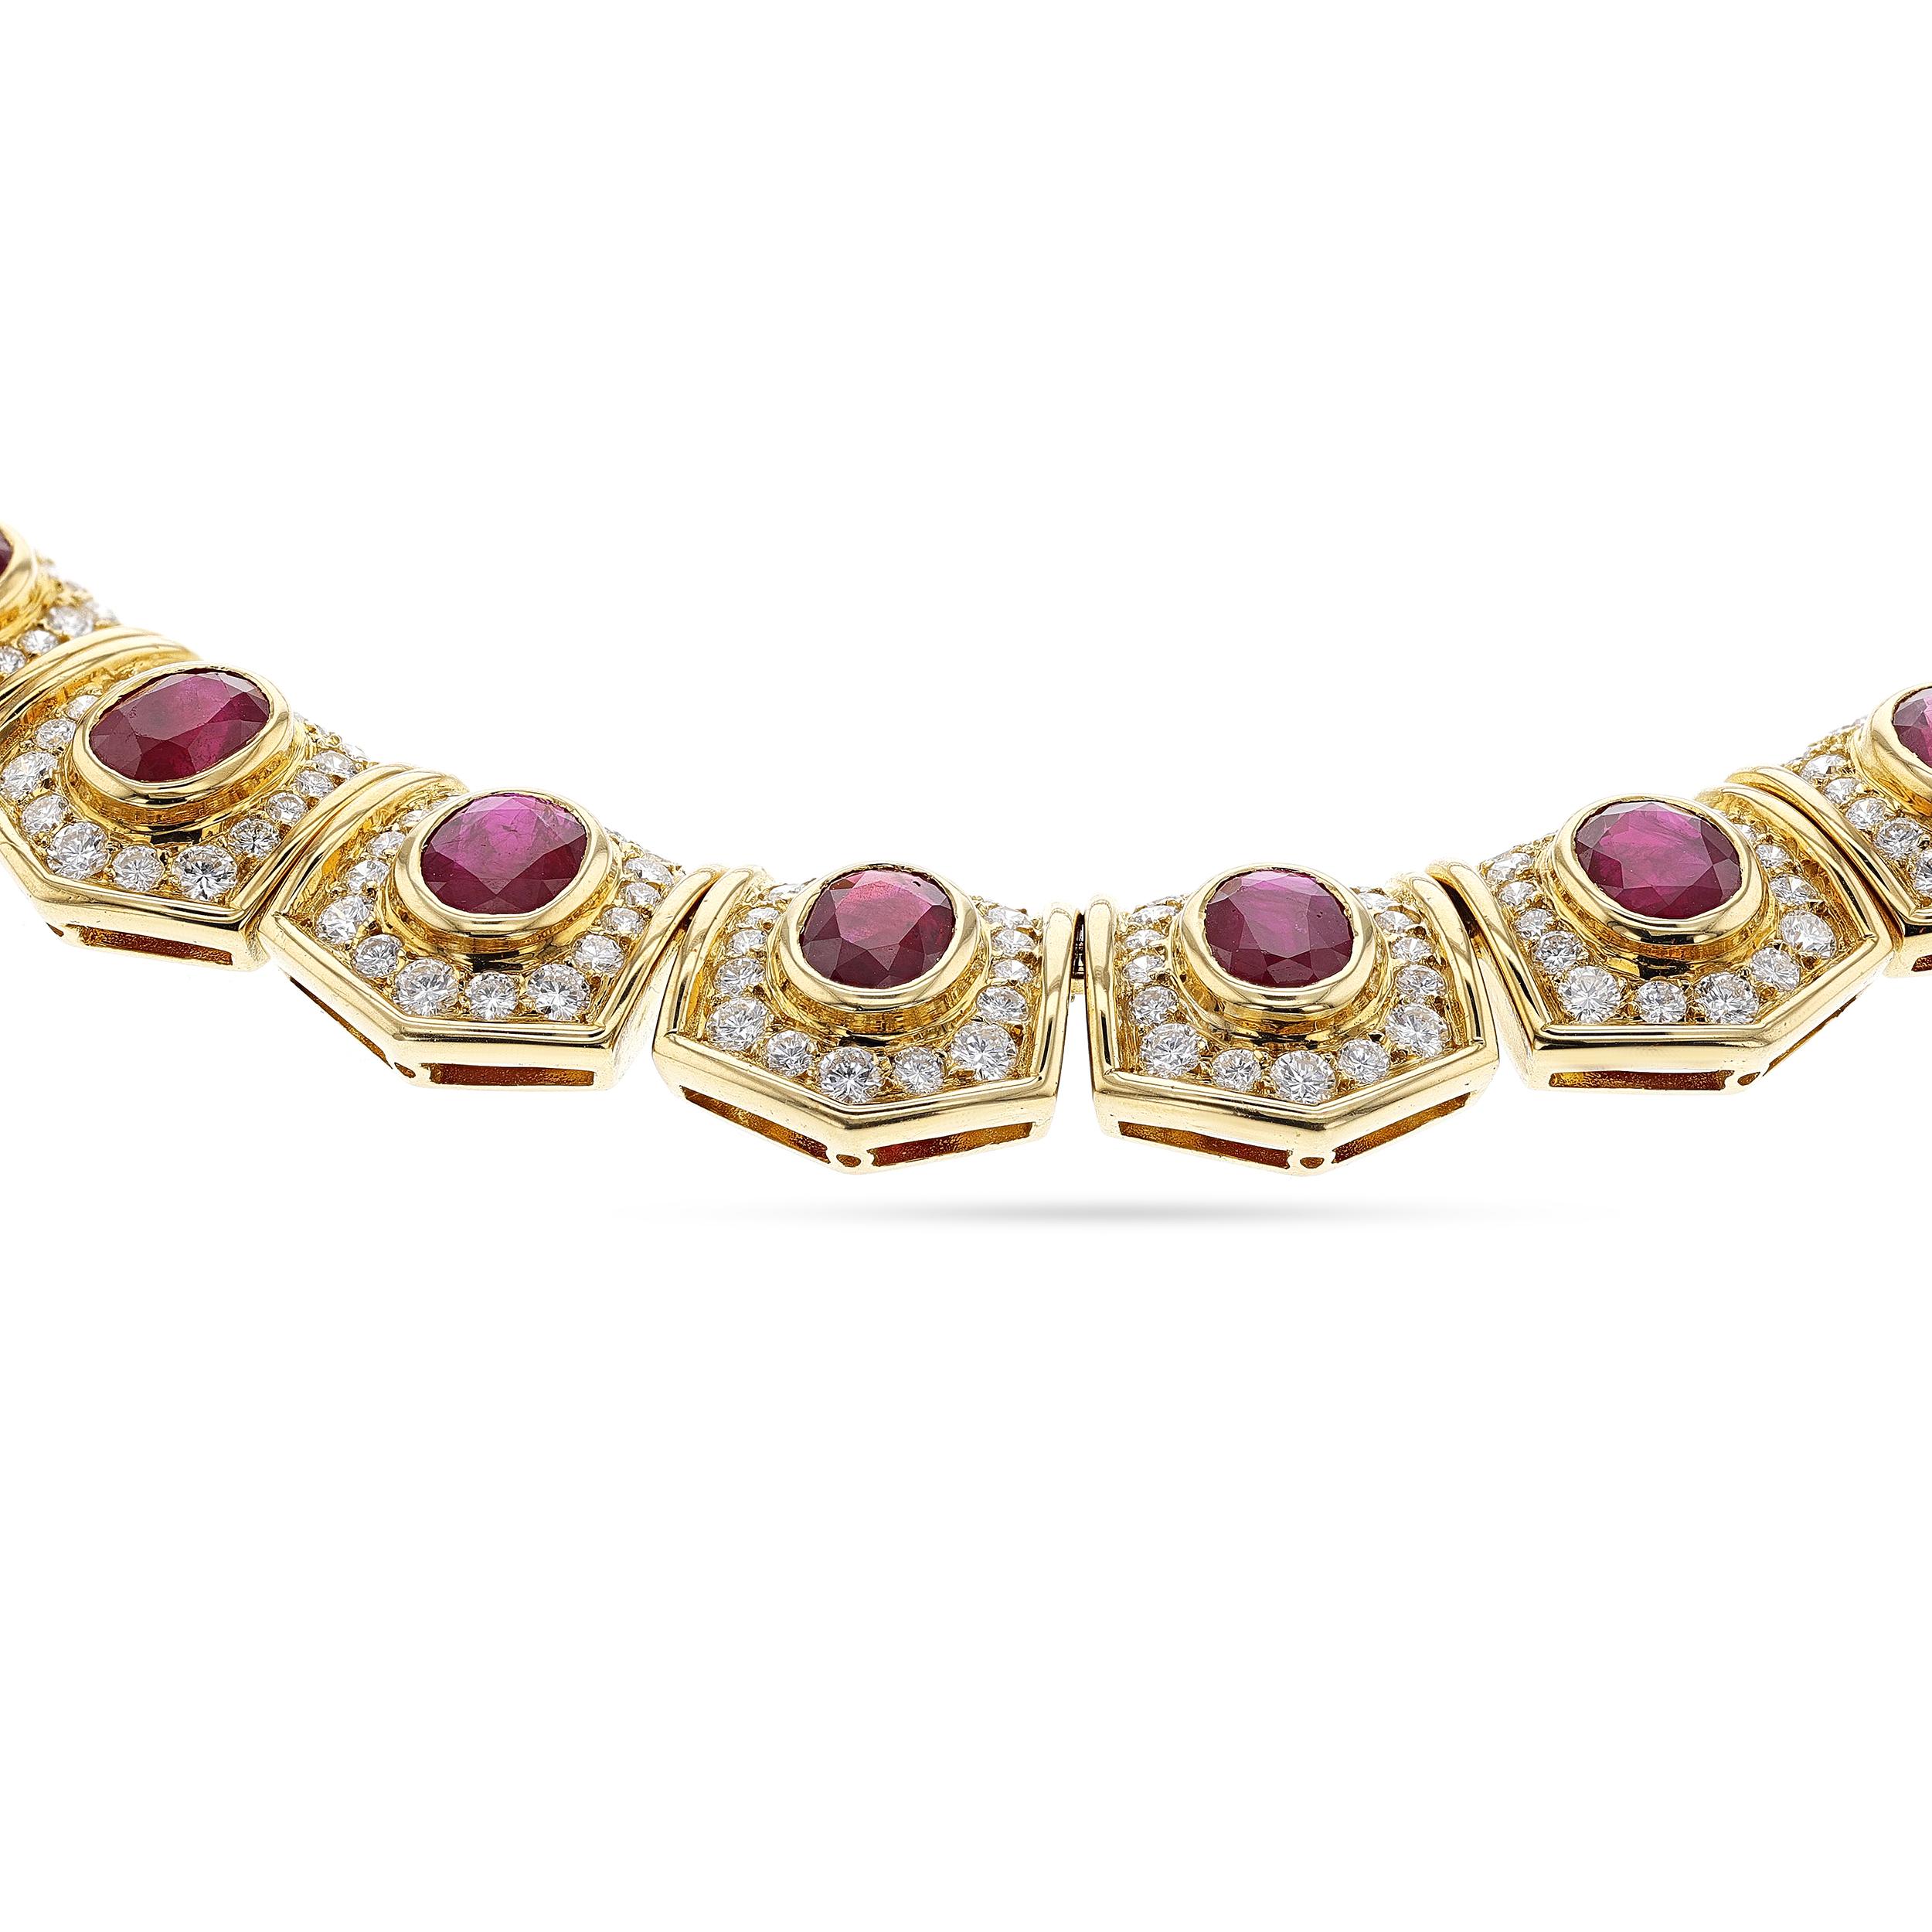 Oval Cut Van Cleef and Arpels Ruby and Diamond, Necklace & Earrings, French, Maker's Mark For Sale